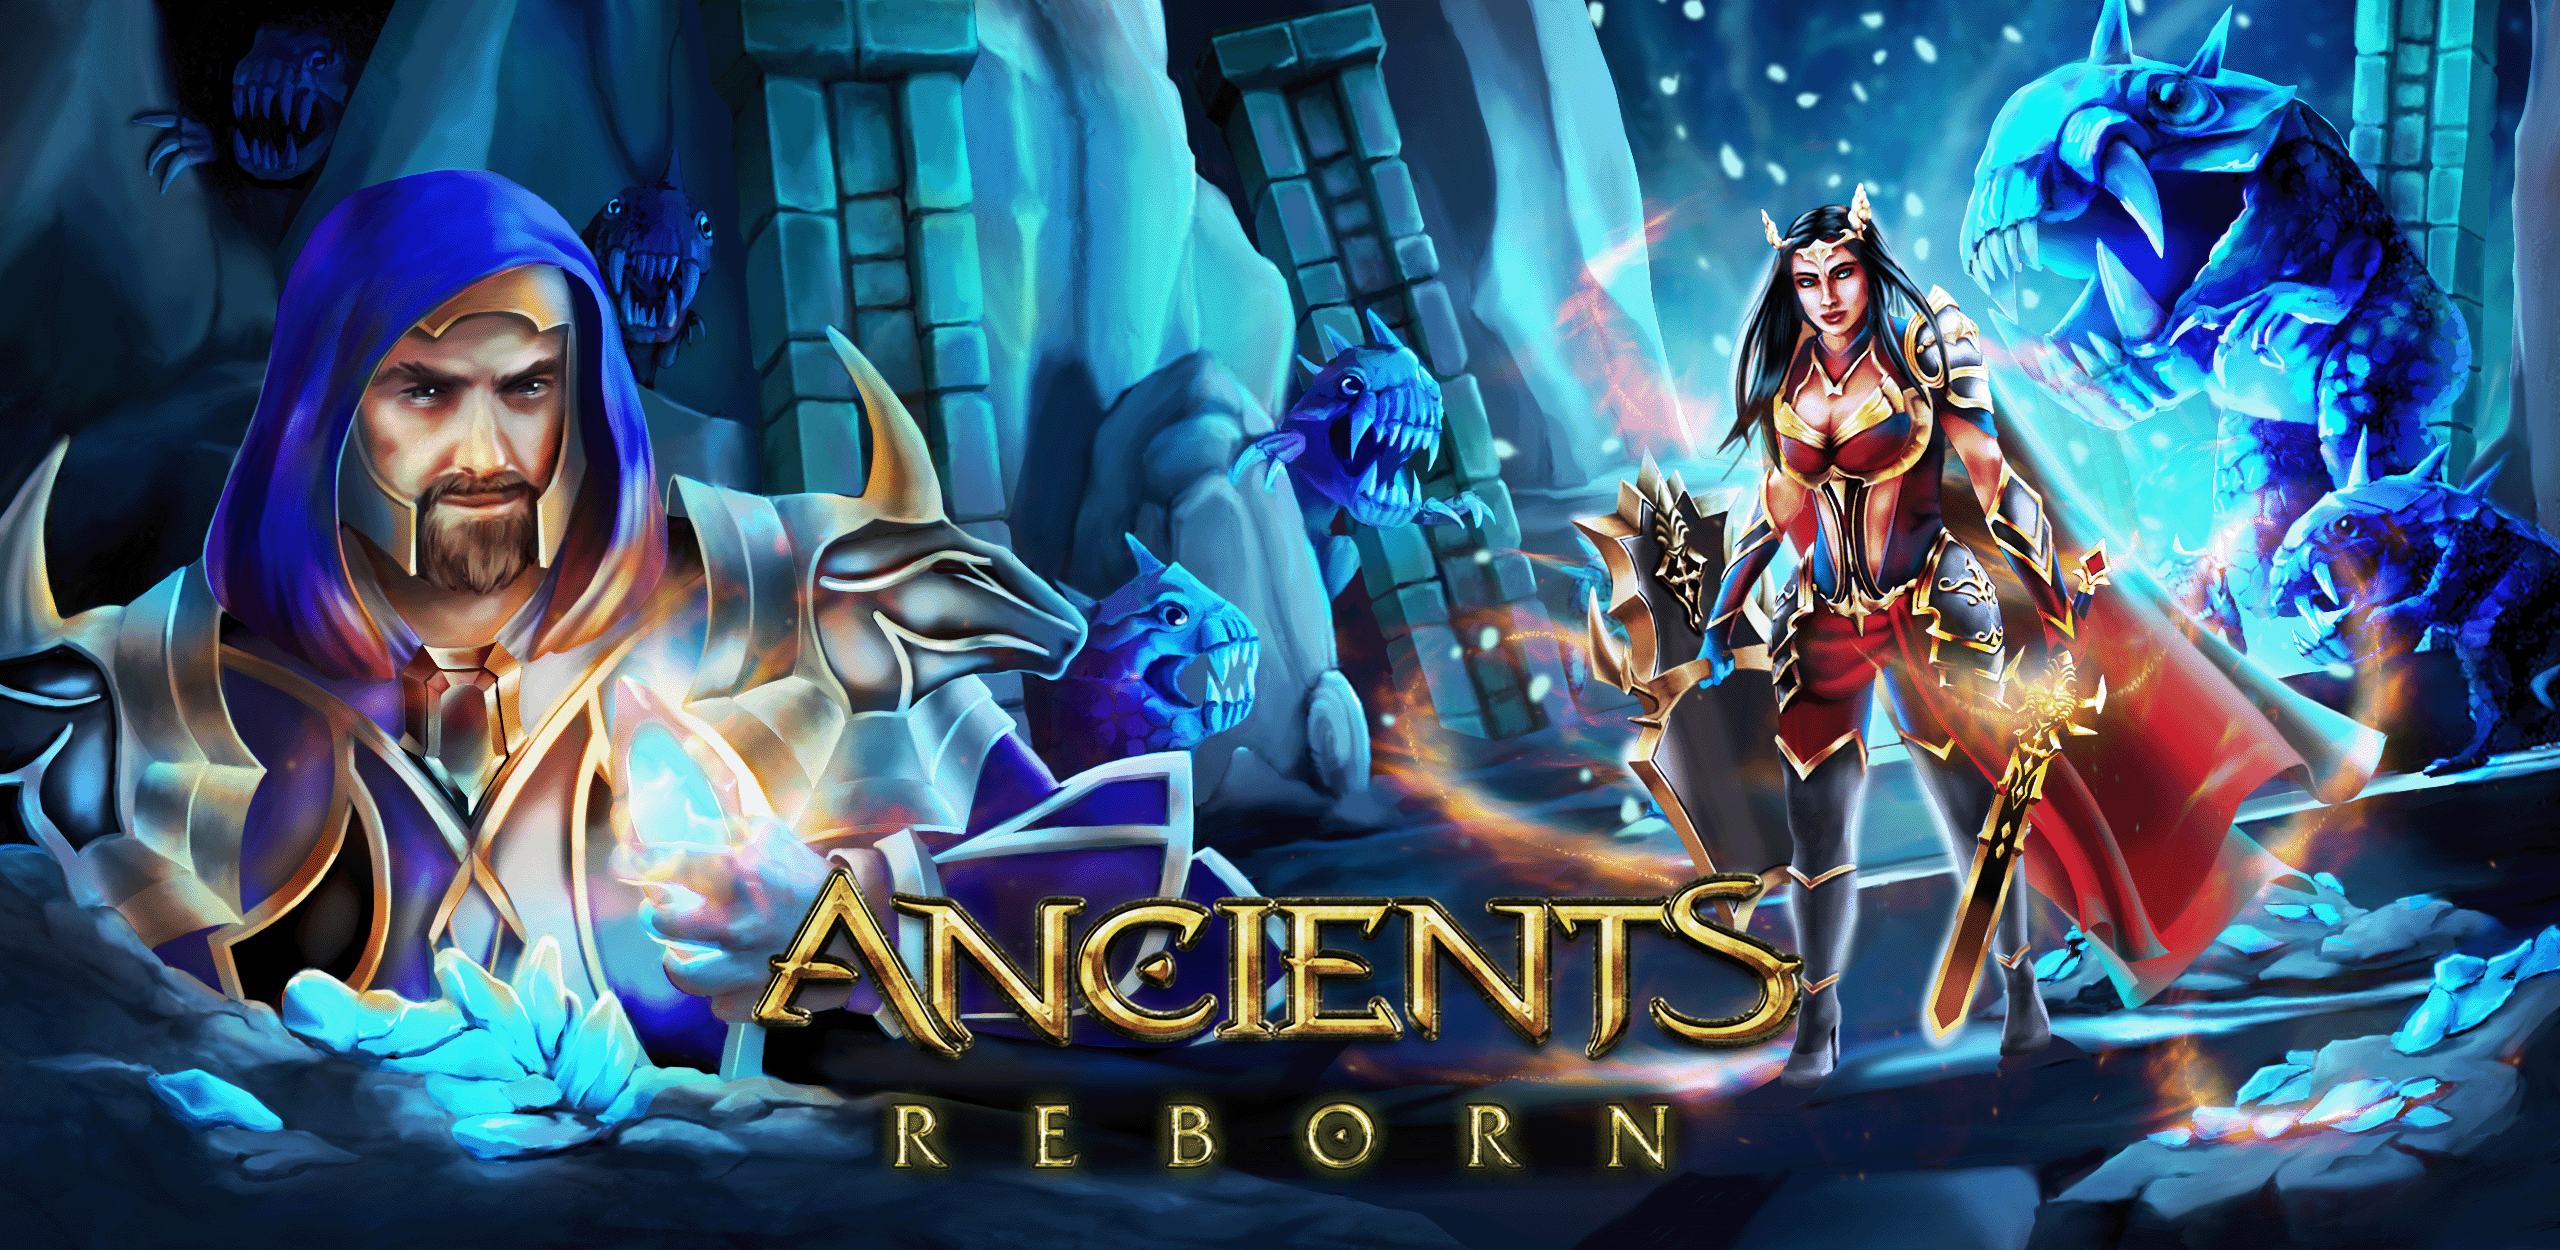 Ancients Reborn offers a MMORPG experience that feels familiar yet fresh